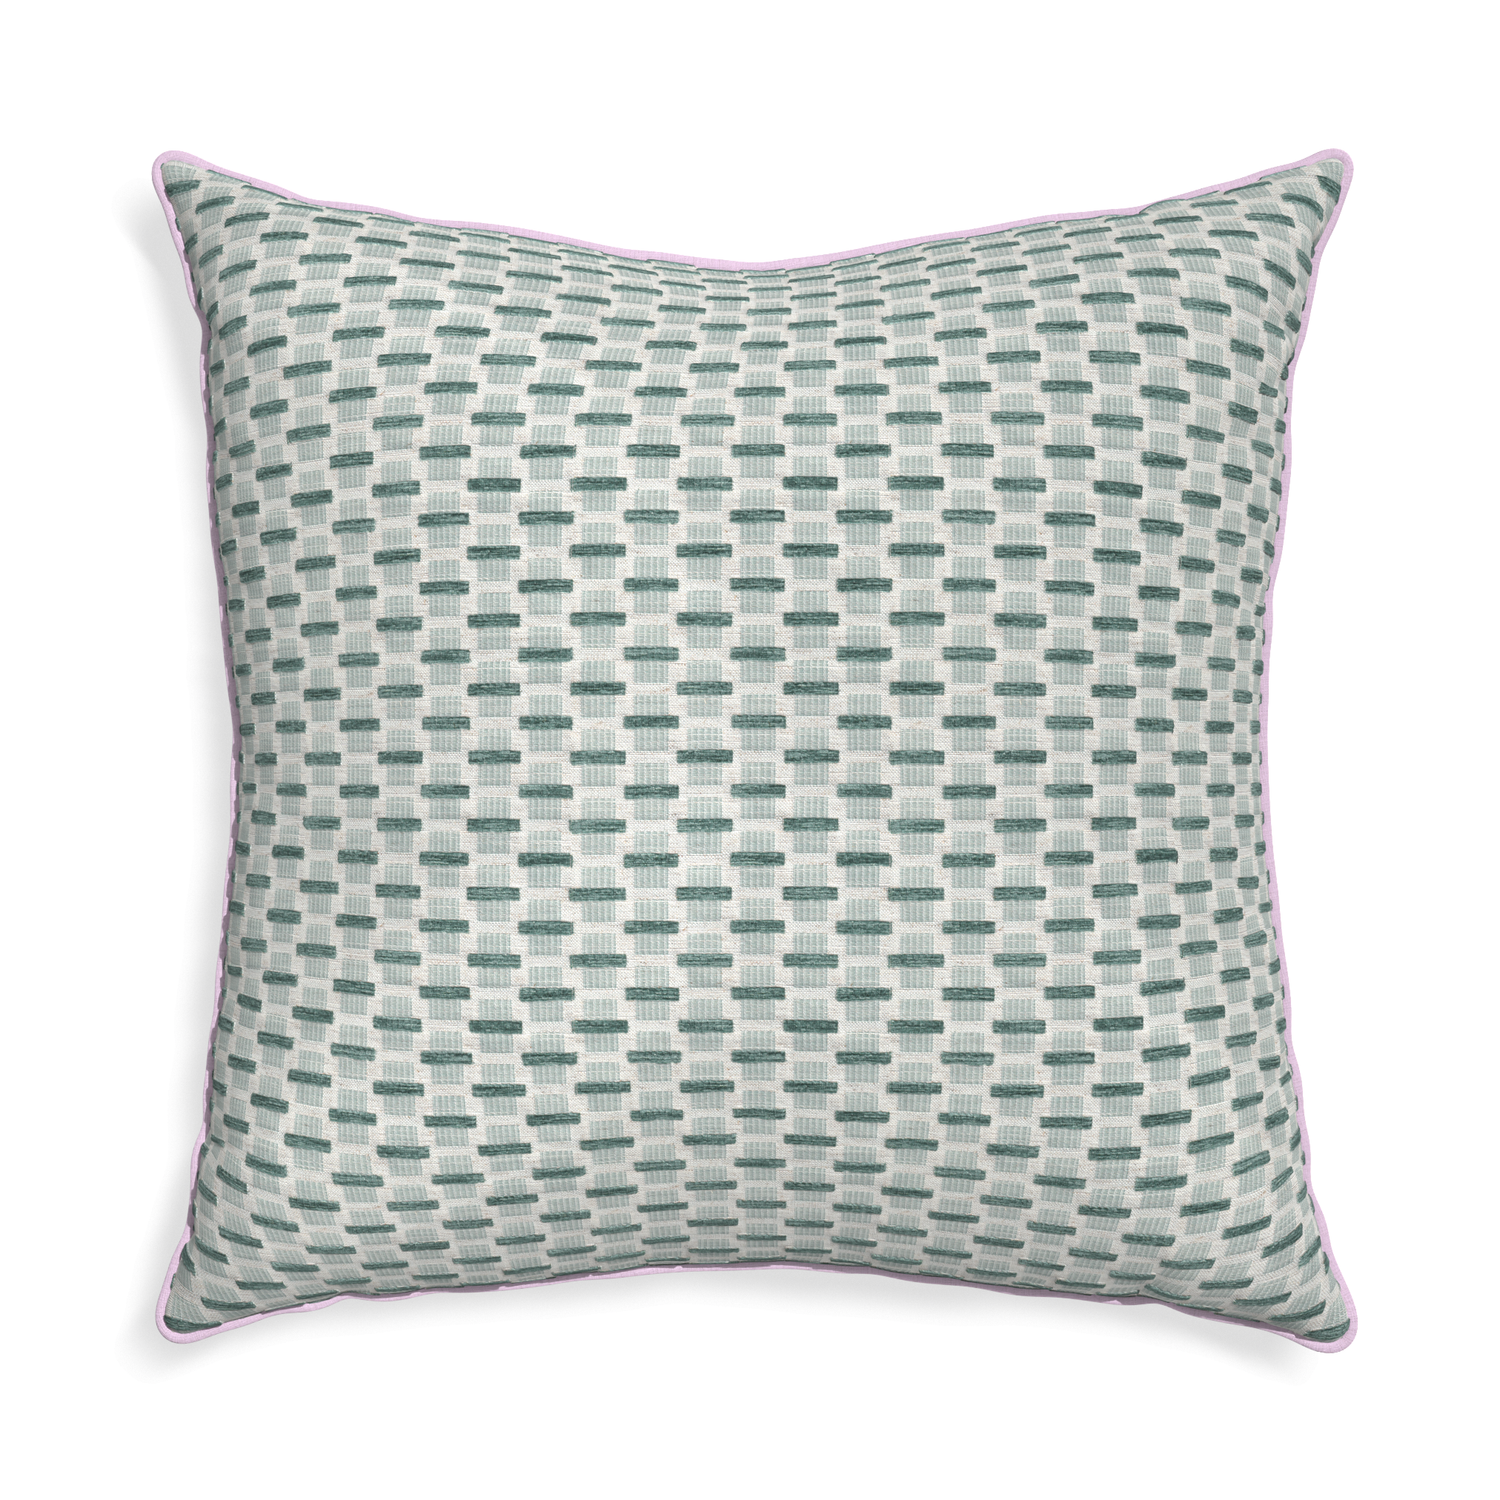 Euro-sham willow mint custom green geometric chenillepillow with l piping on white background